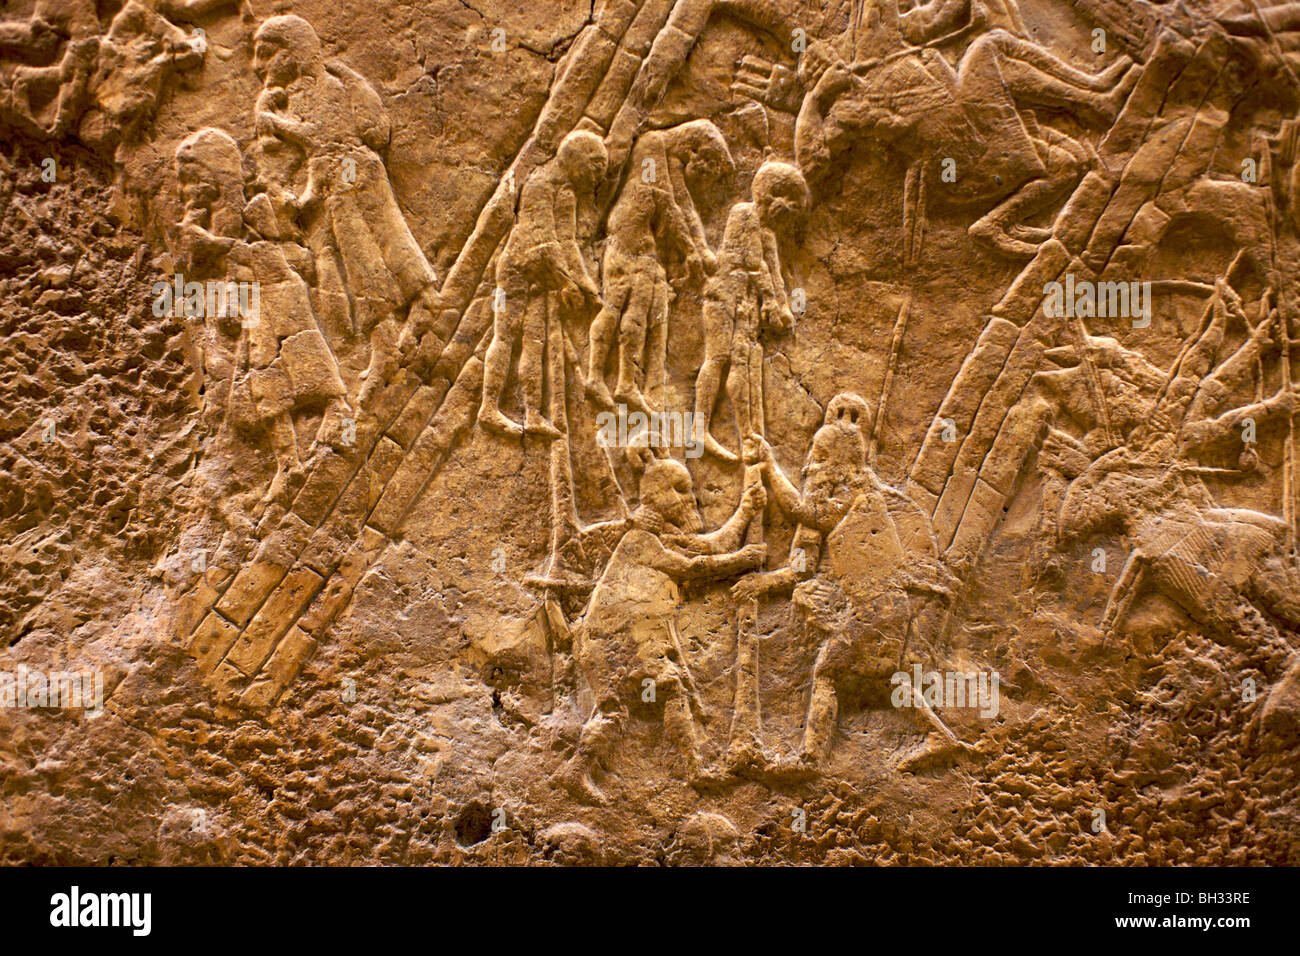 Prisoners being impaled on stakes in a detail of an Assyrian frieze now in the British Museum London Stock Photo